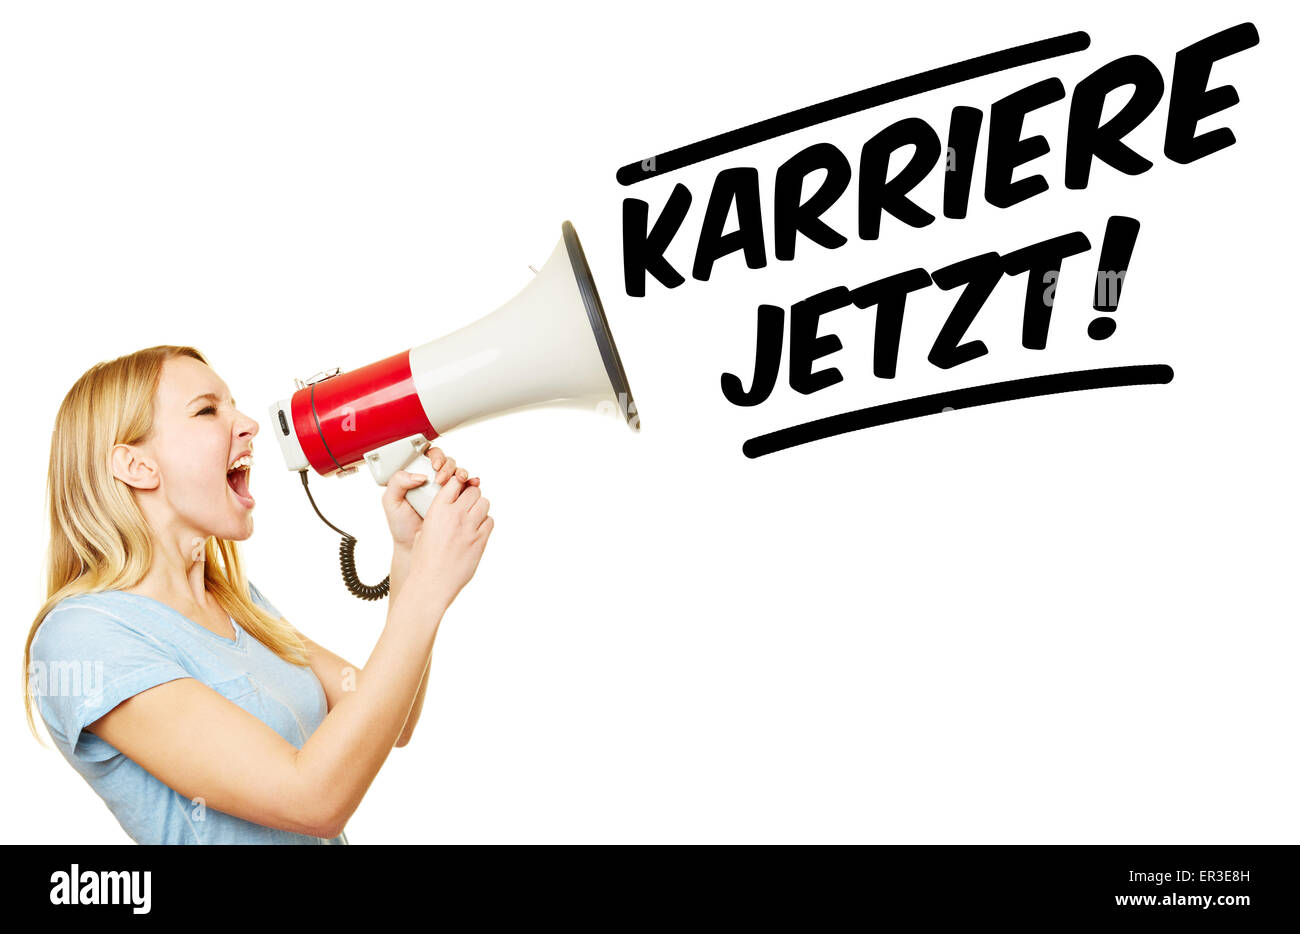 Young woman with megaphone demanding in German 'Karriere jetzt!' (Career now!) Stock Photo